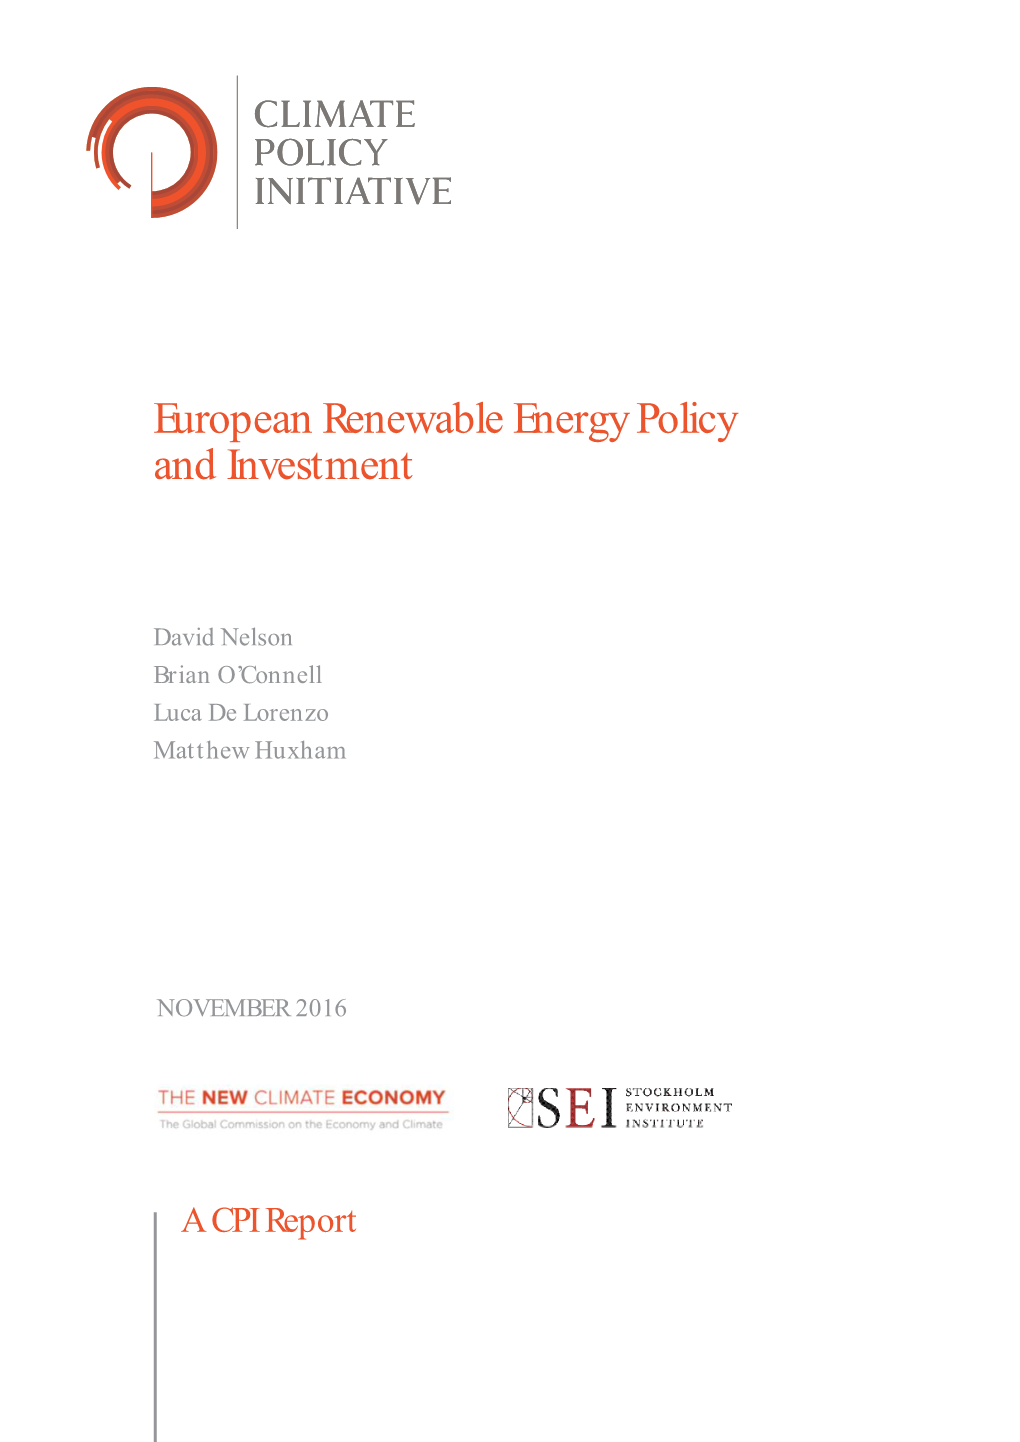 European Renewable Energy Policy and Investment 2016